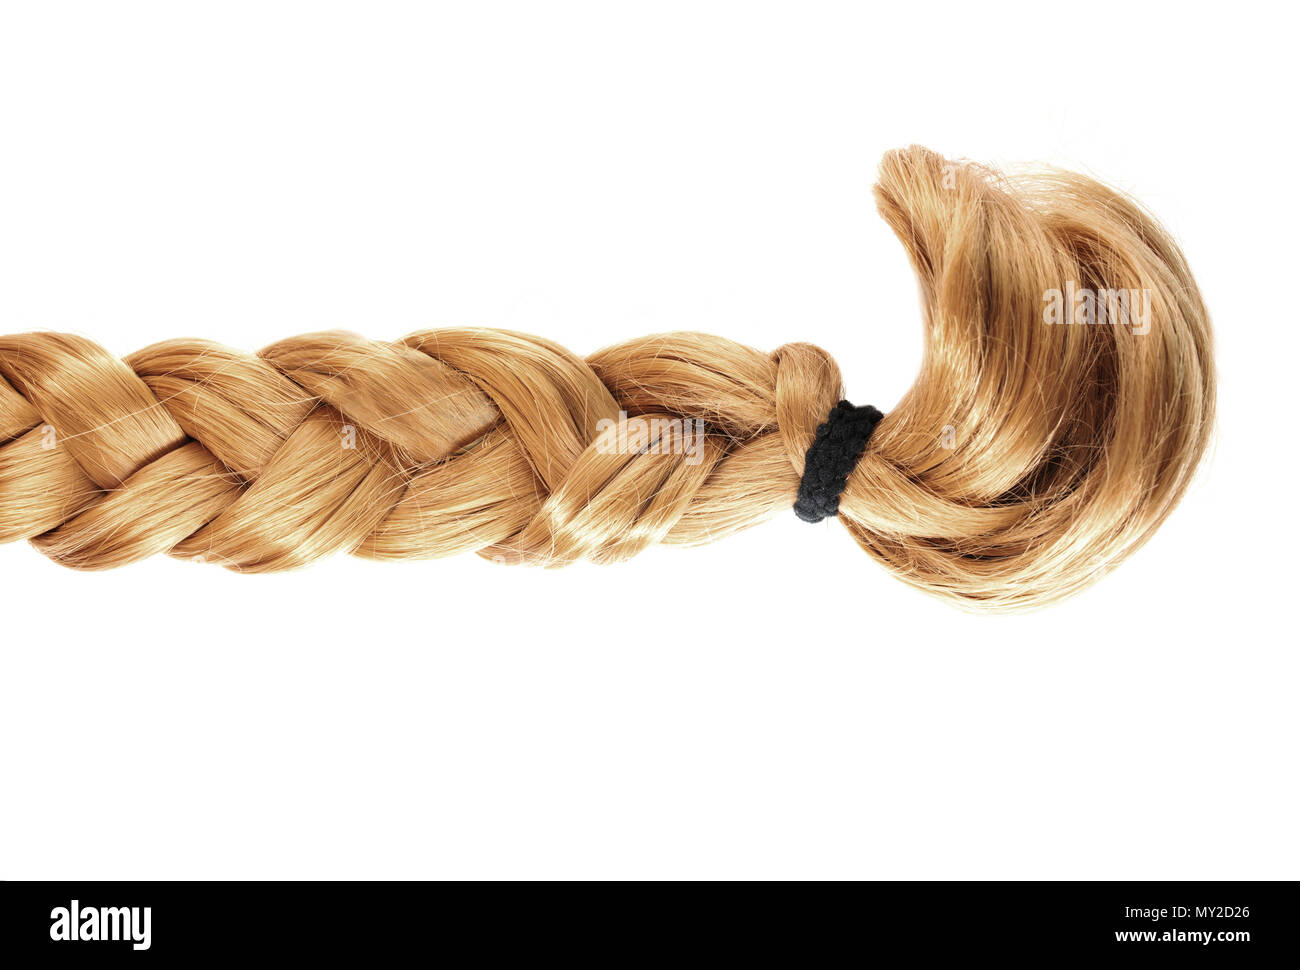 blond plait or braid of blond hair on white background Stock Photo